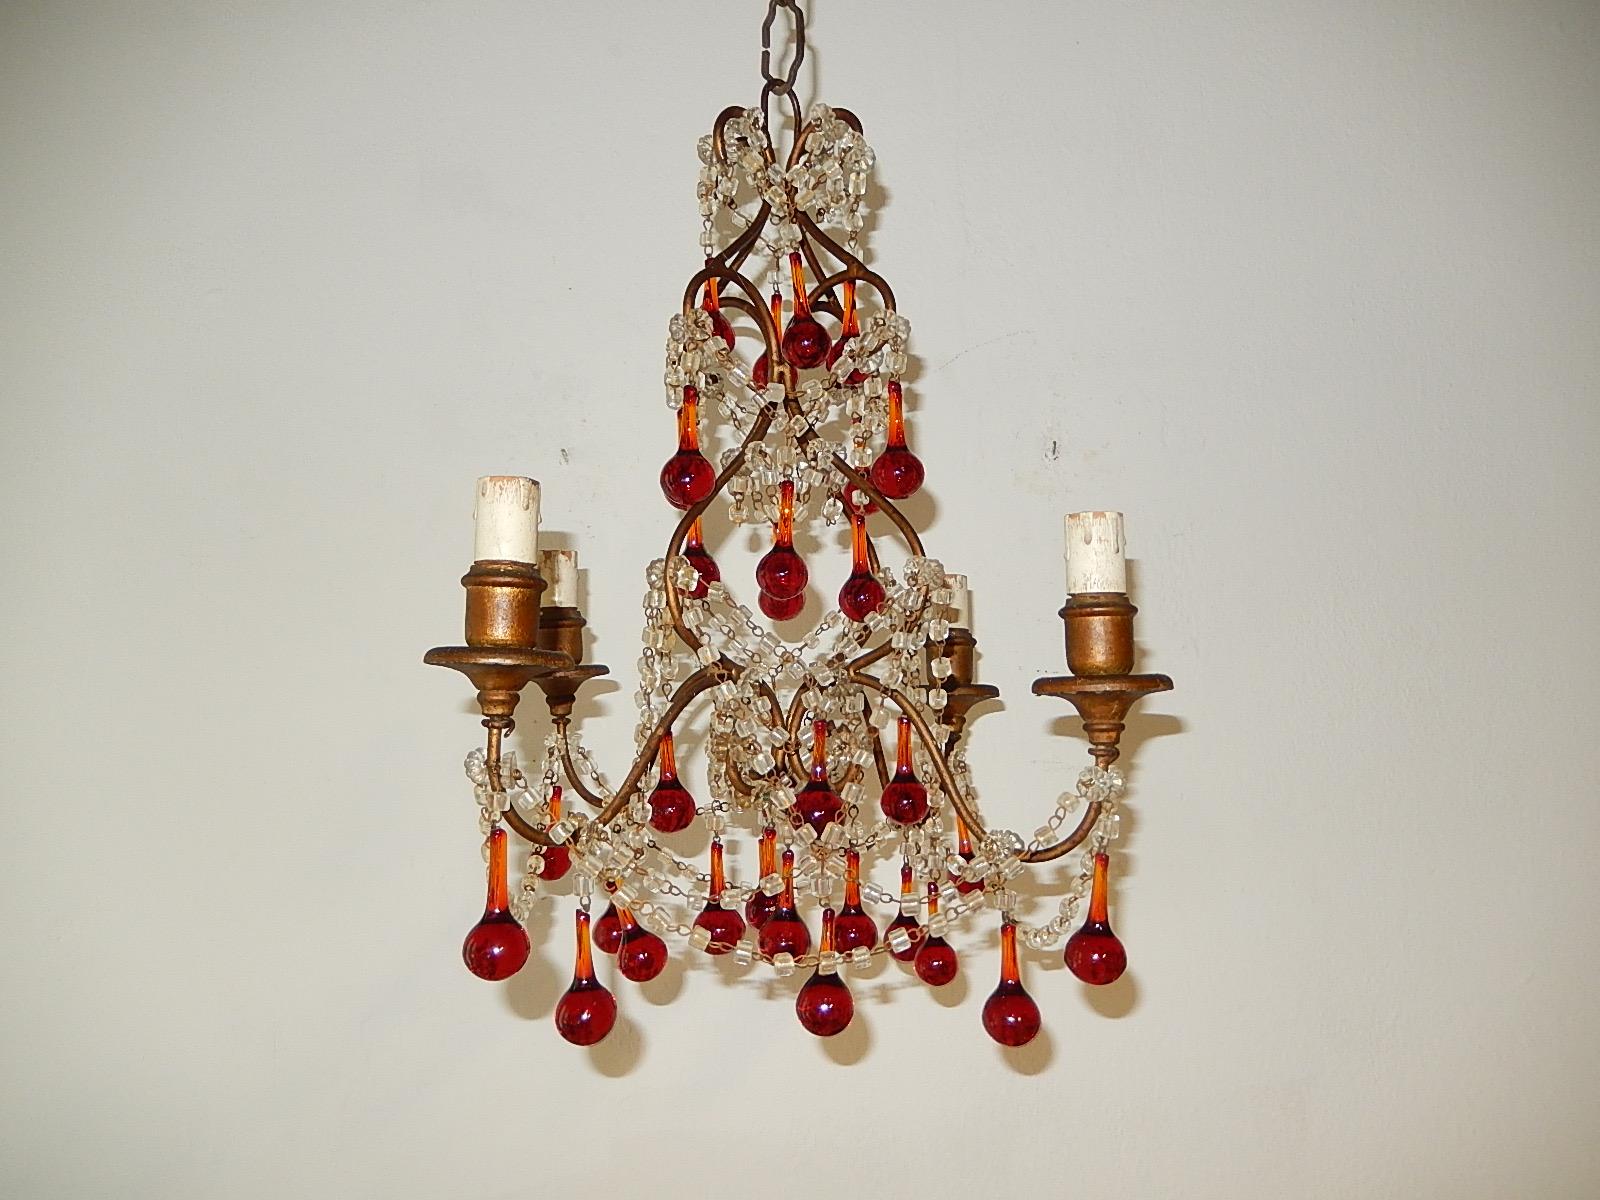 Housing 4-light, will be rewired with certified US UL sockets for the USA and appropriate sockets for all other countries, ready to hang. Wood bulb posts. Swags of macaroni beads and rare red Murano drops. Adding 12 inches of original chain still